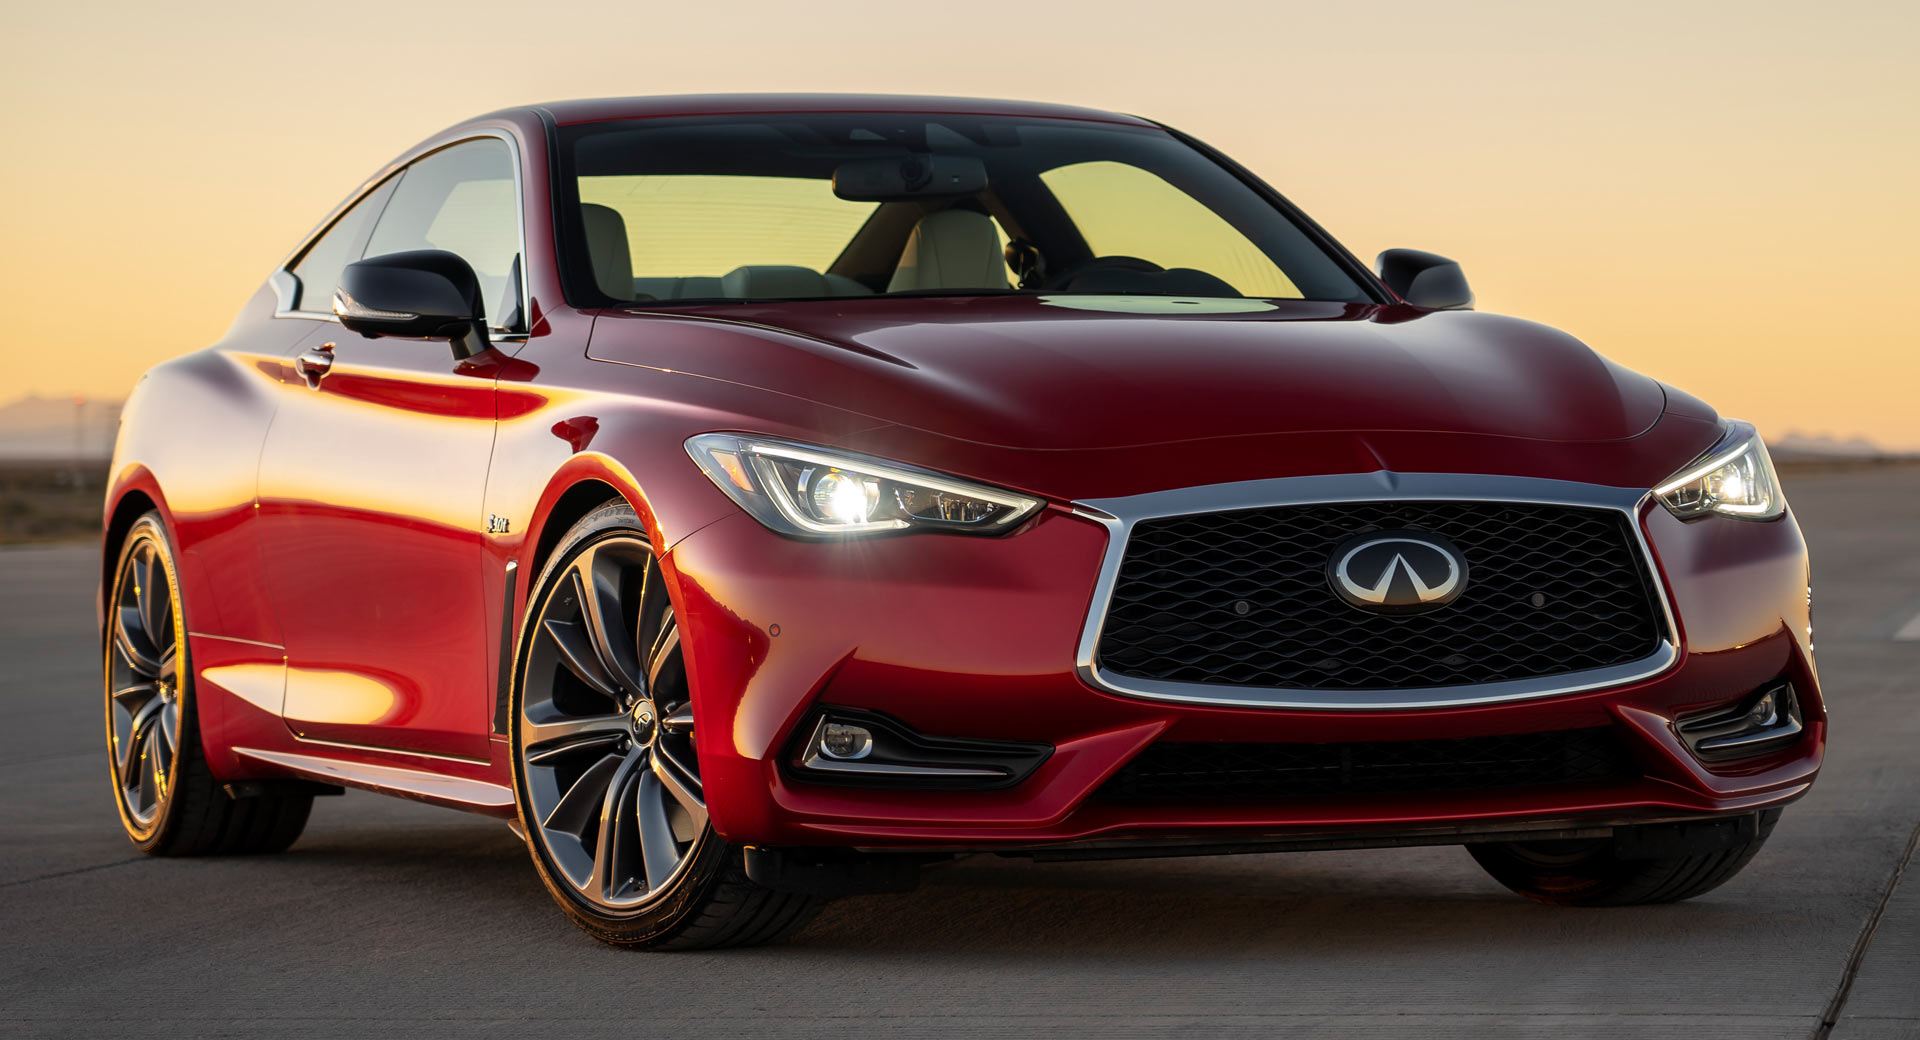 infiniti-goes-all-out-offering-0-financing-for-up-to-6-years-and